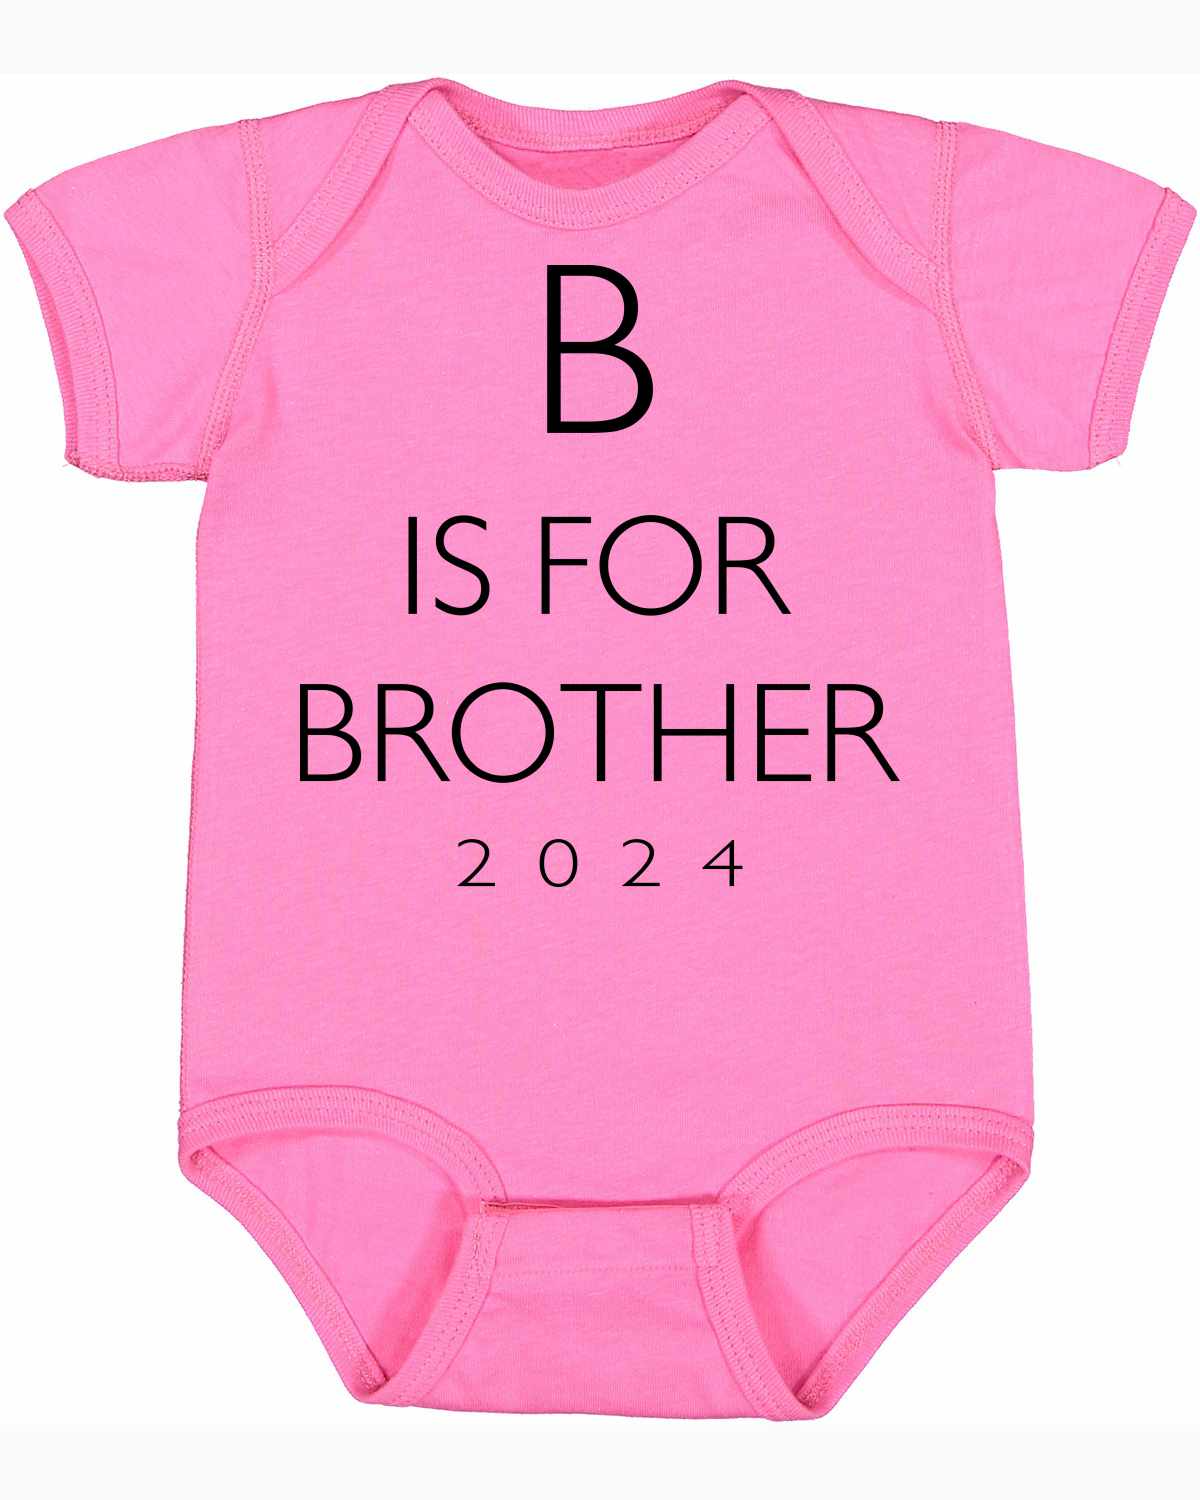 B Is For Brother 2024 on Infant BodySuit (#1366-10)